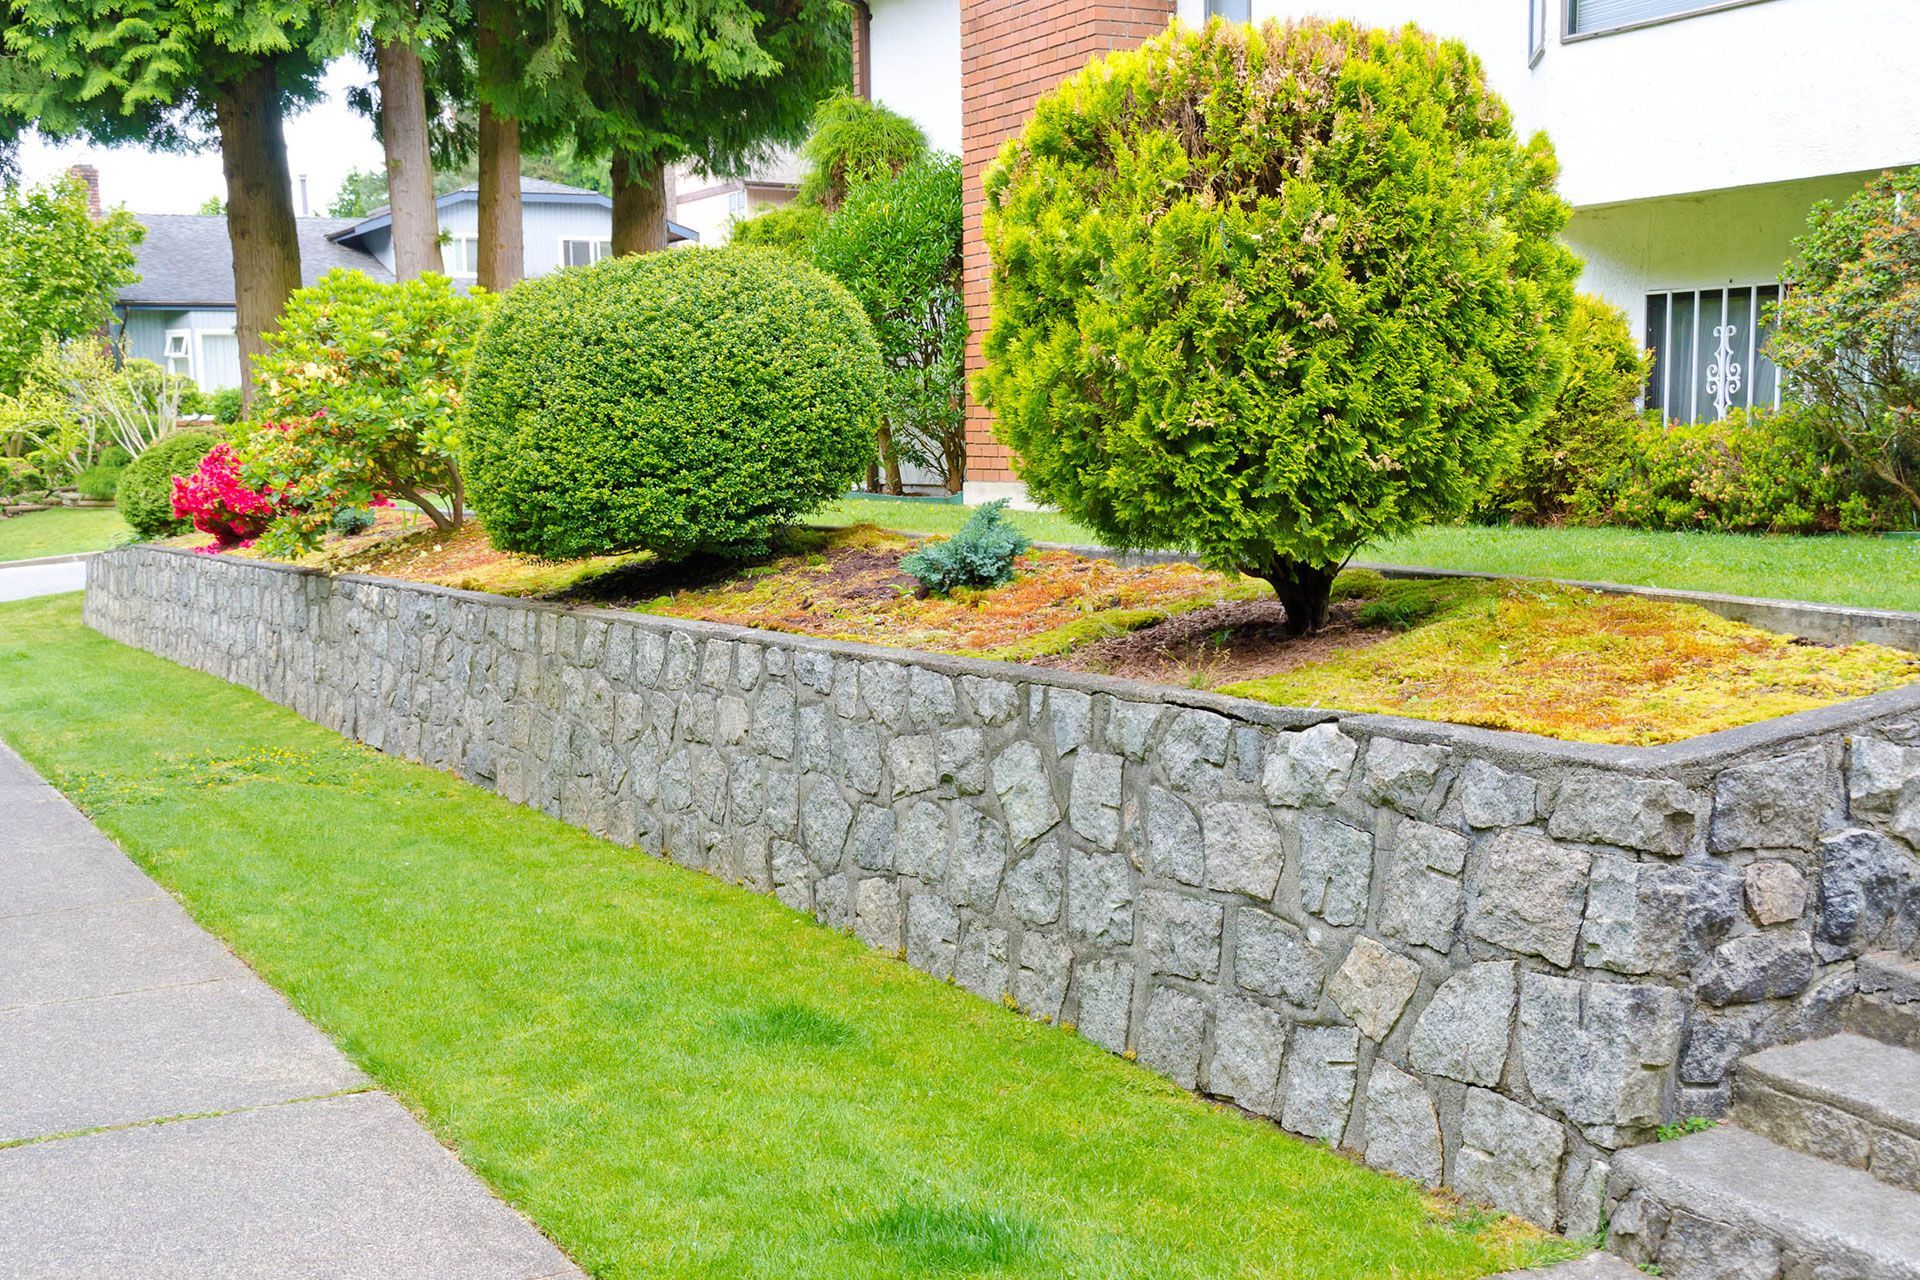 a stone wall surrounds a lush green yard with trees and bushes